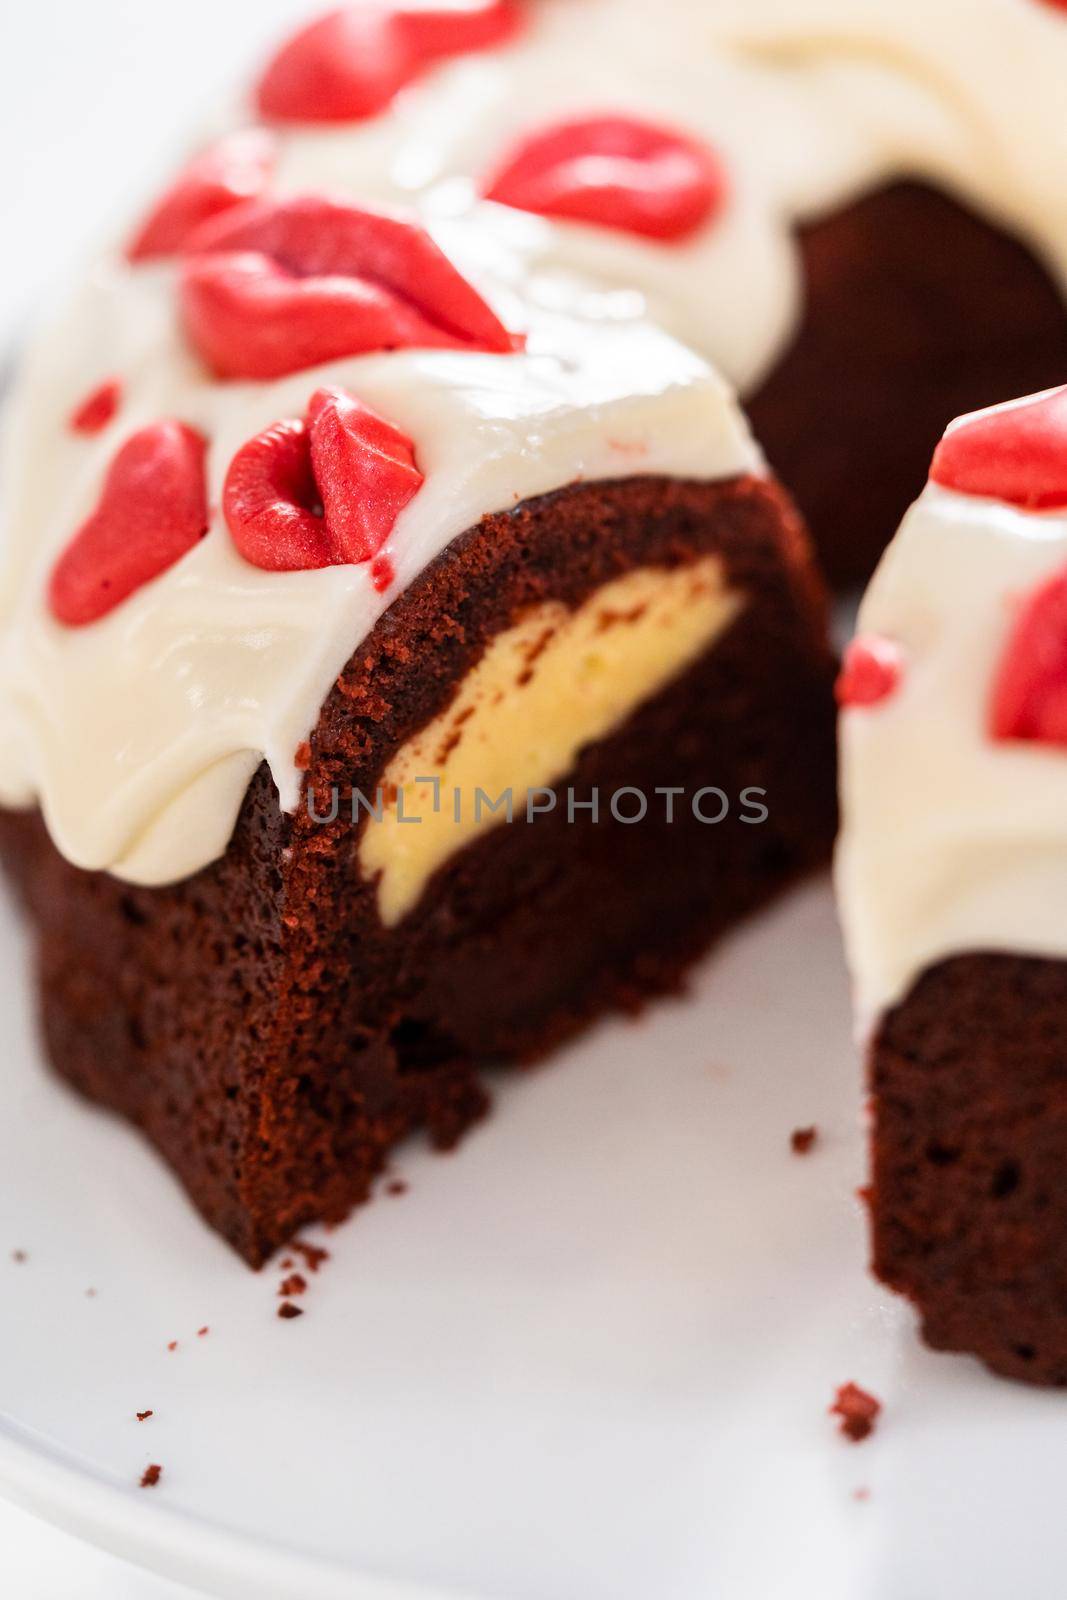 Slicing freshly baked red velvet bundt cake with chocolate lips and hearts over cream cheese glaze for Valentine's Day.